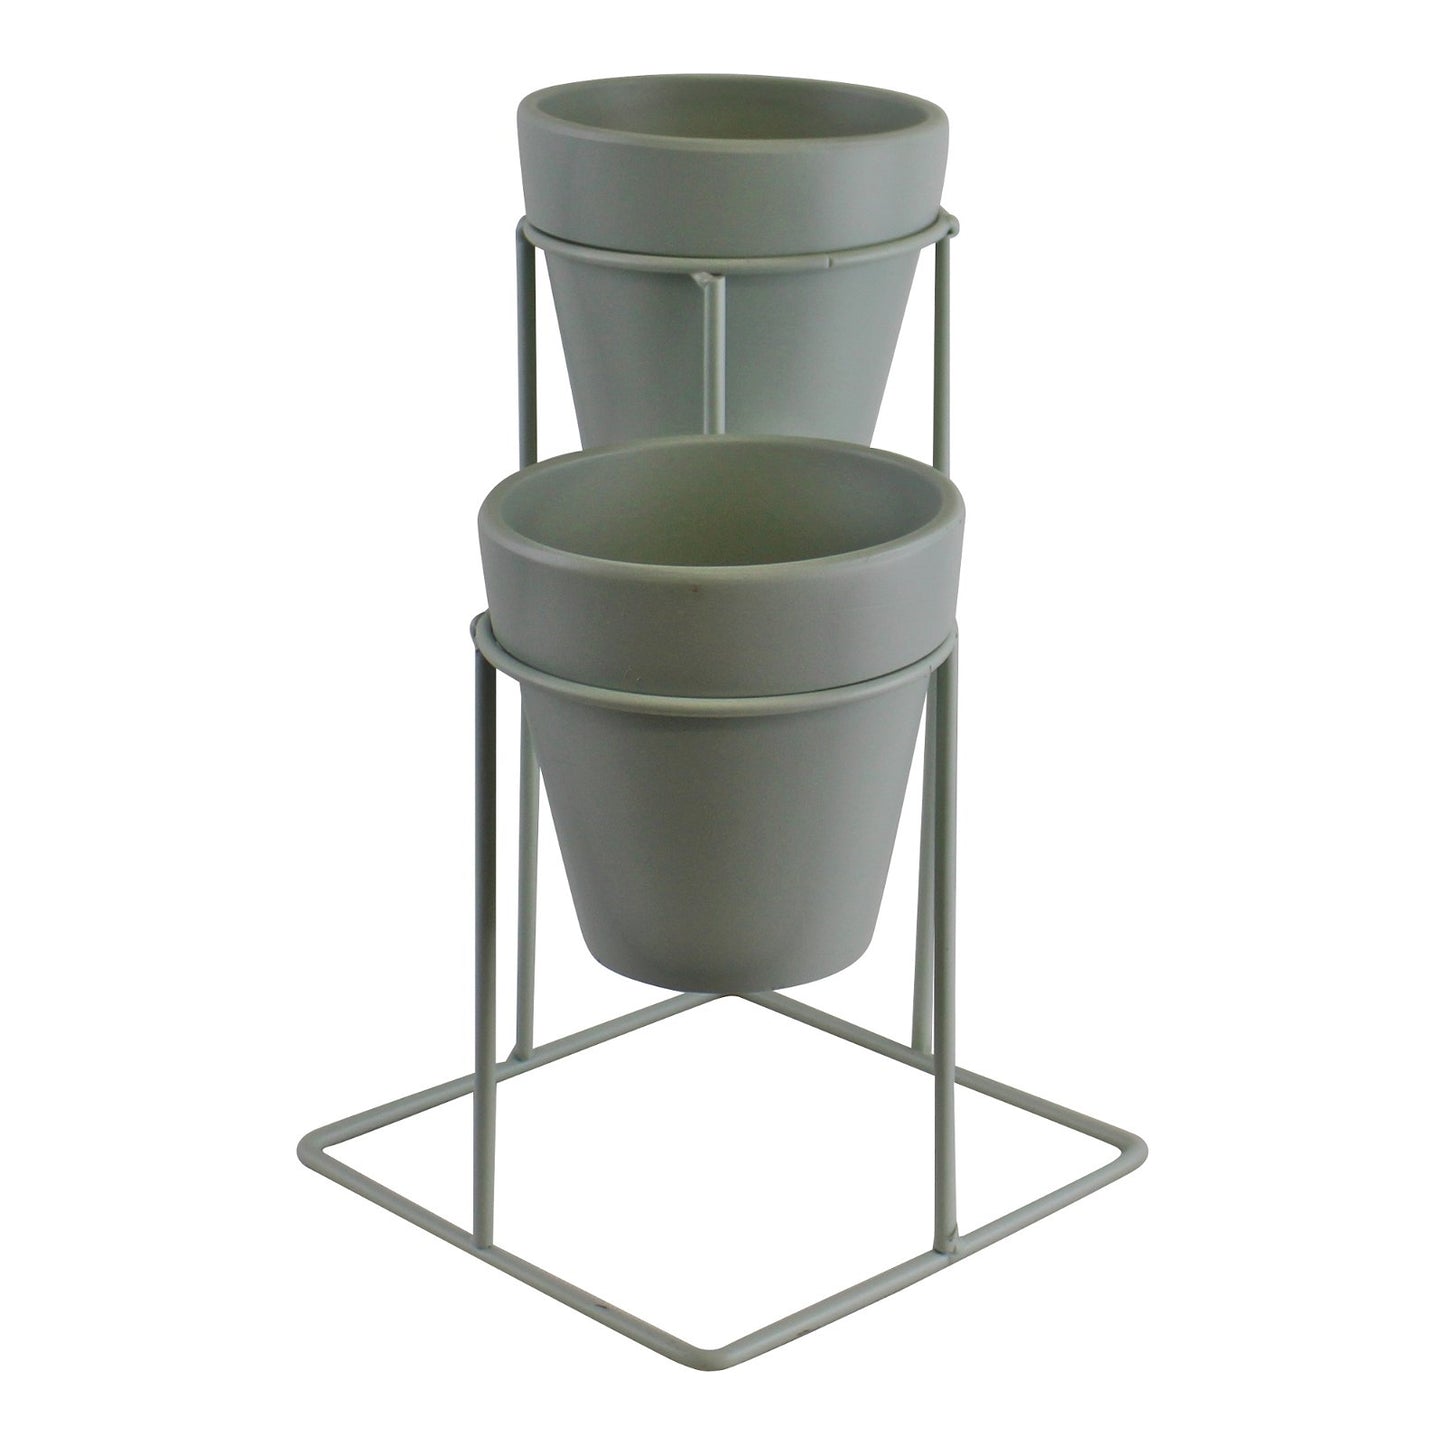 Potting Shed Small Double Planter On Stand, Green - Kaftan direct